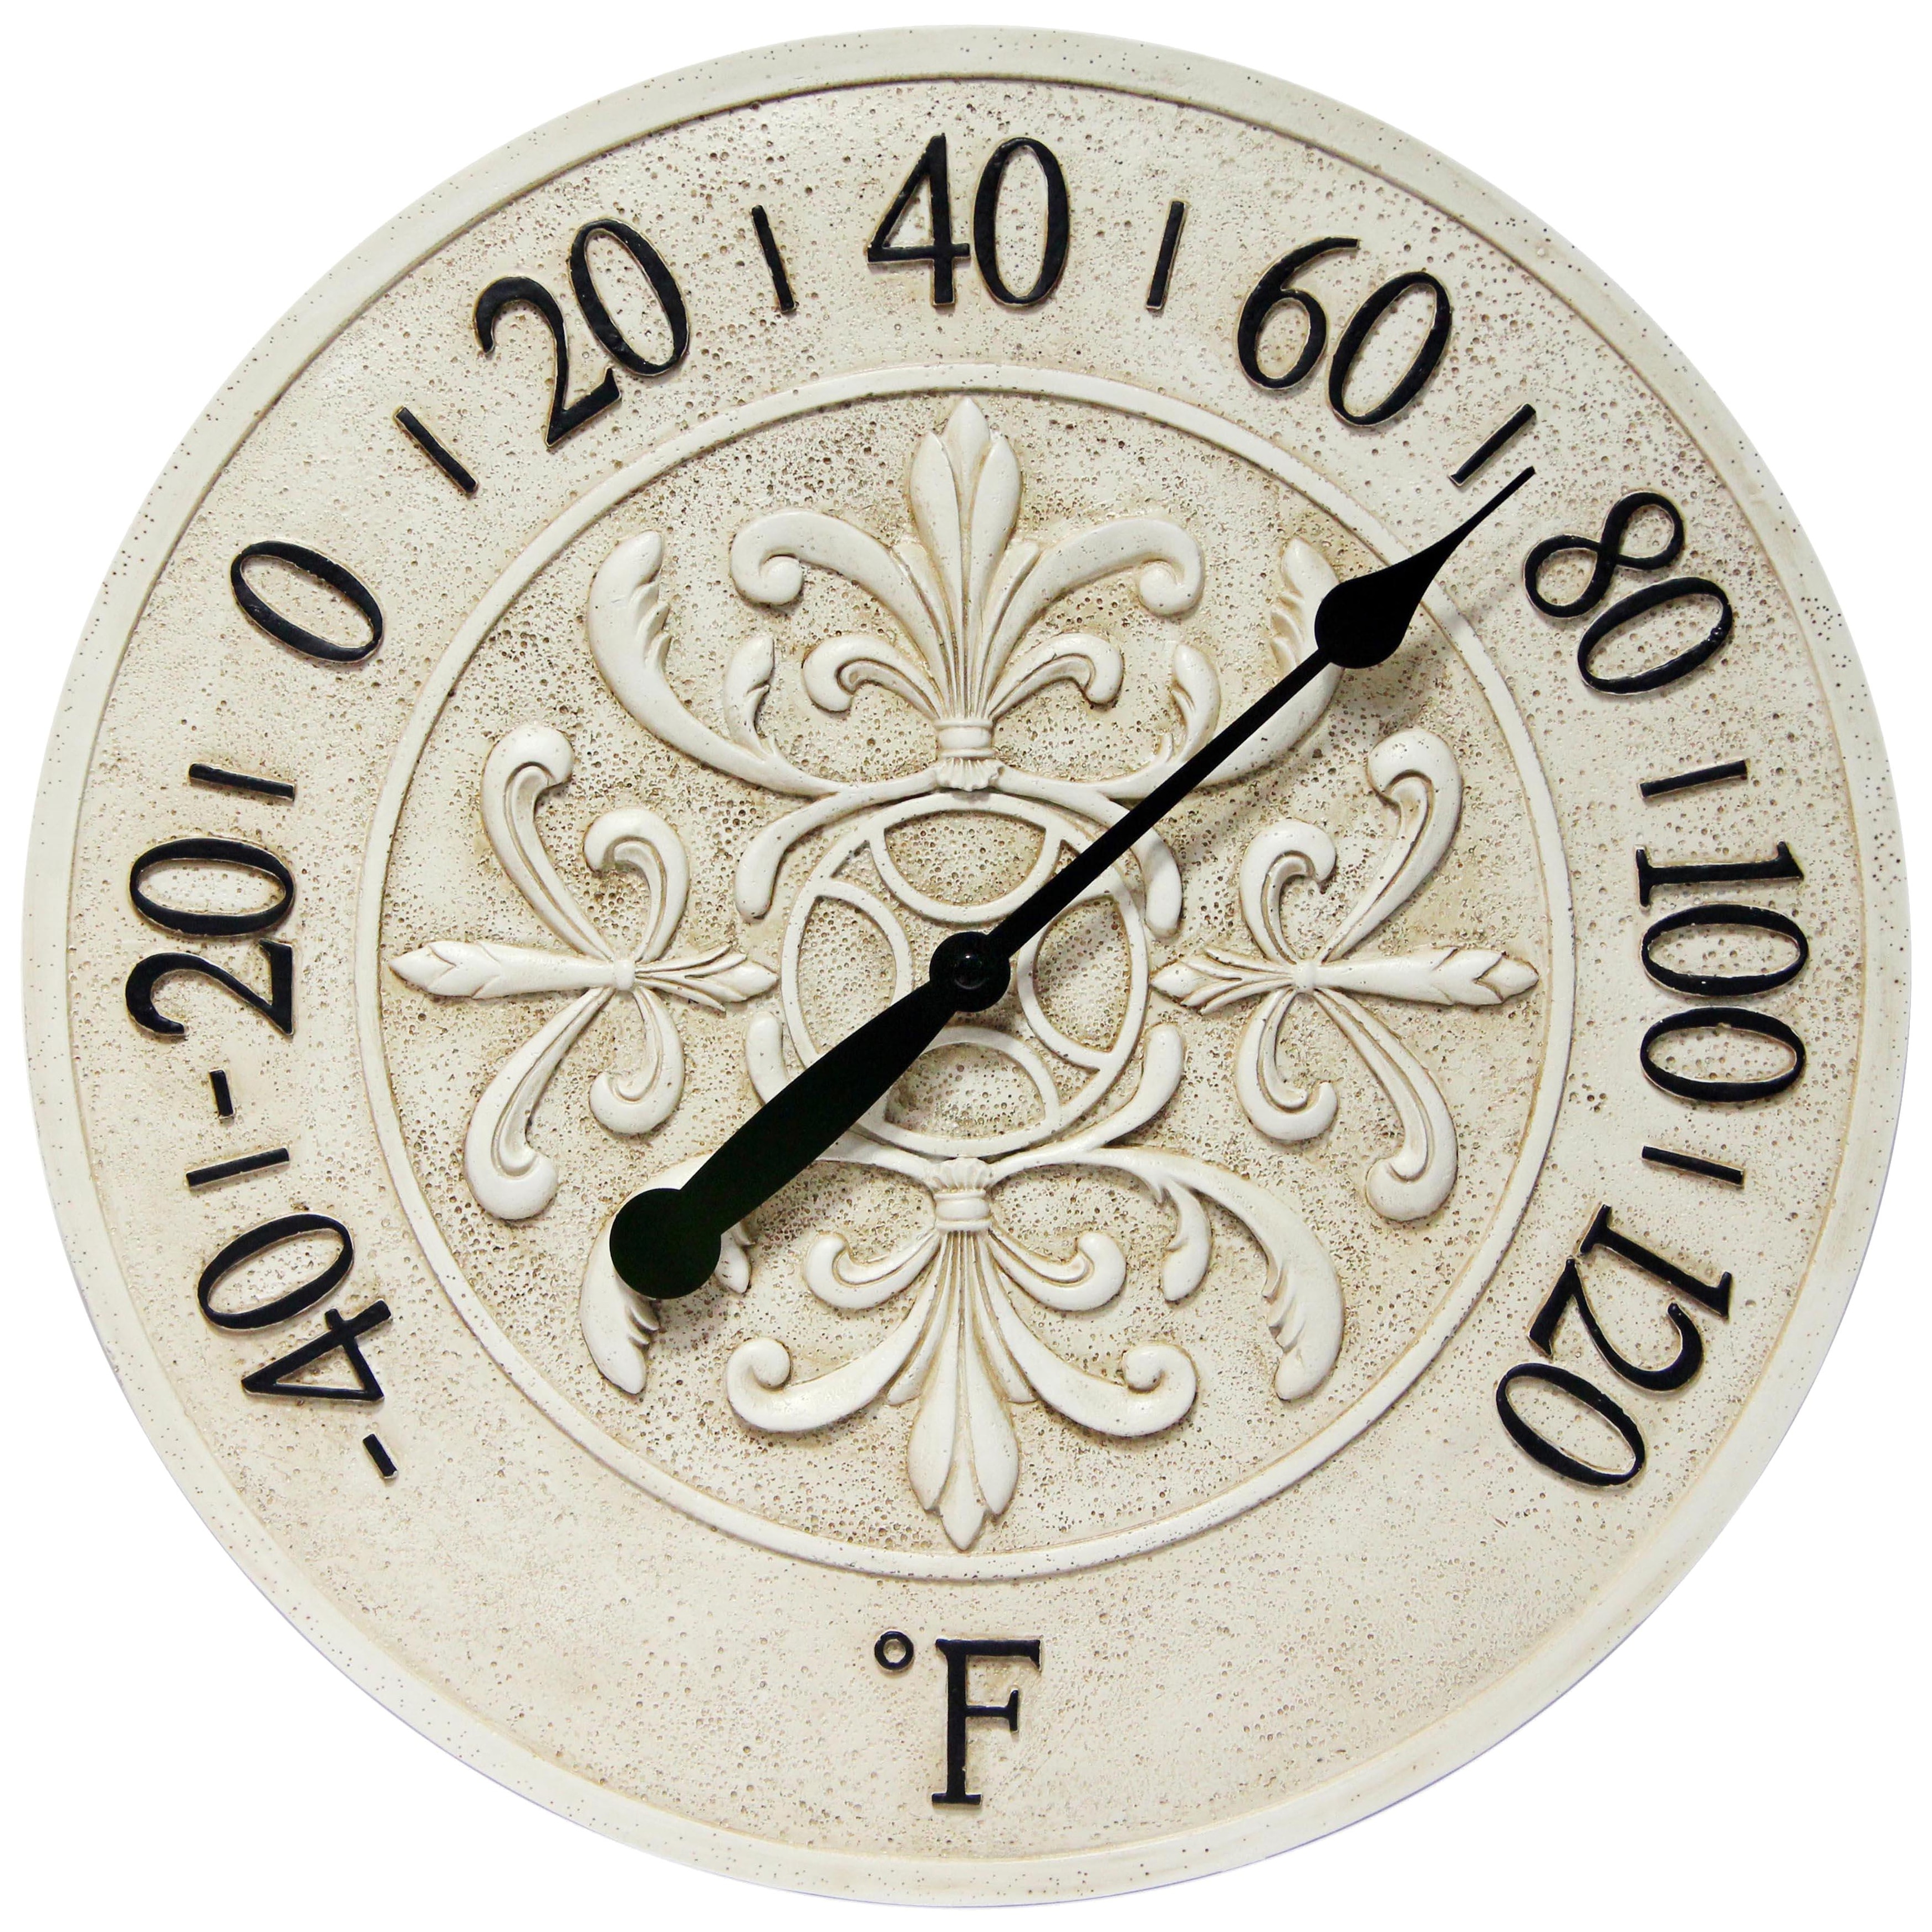 https://ak1.ostkcdn.com/images/products/is/images/direct/7acd651beadfa893a4fc4050685521045fd392ef/Blanc-Fleur-Outdoor-Decorative-Round-15-inch-Wall-Thermometer-by-Infinity-Instruments.jpg